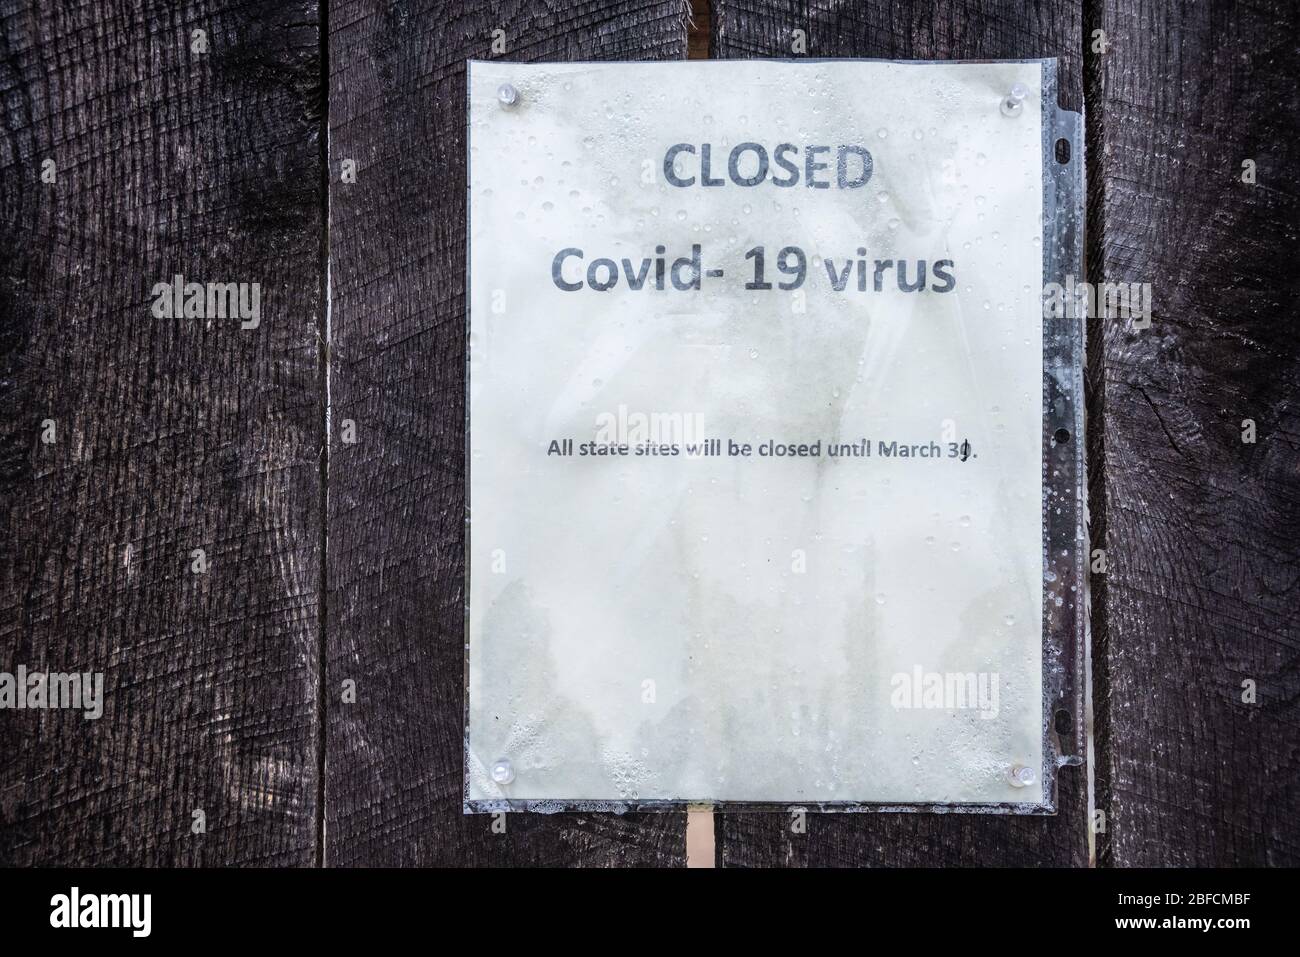 Closure notice pinned to the wooden gates of the Fort Gibson Historic Site in Fort Gibson, Oklahoma due to the COVID-19 pandemic. (USA) Stock Photo